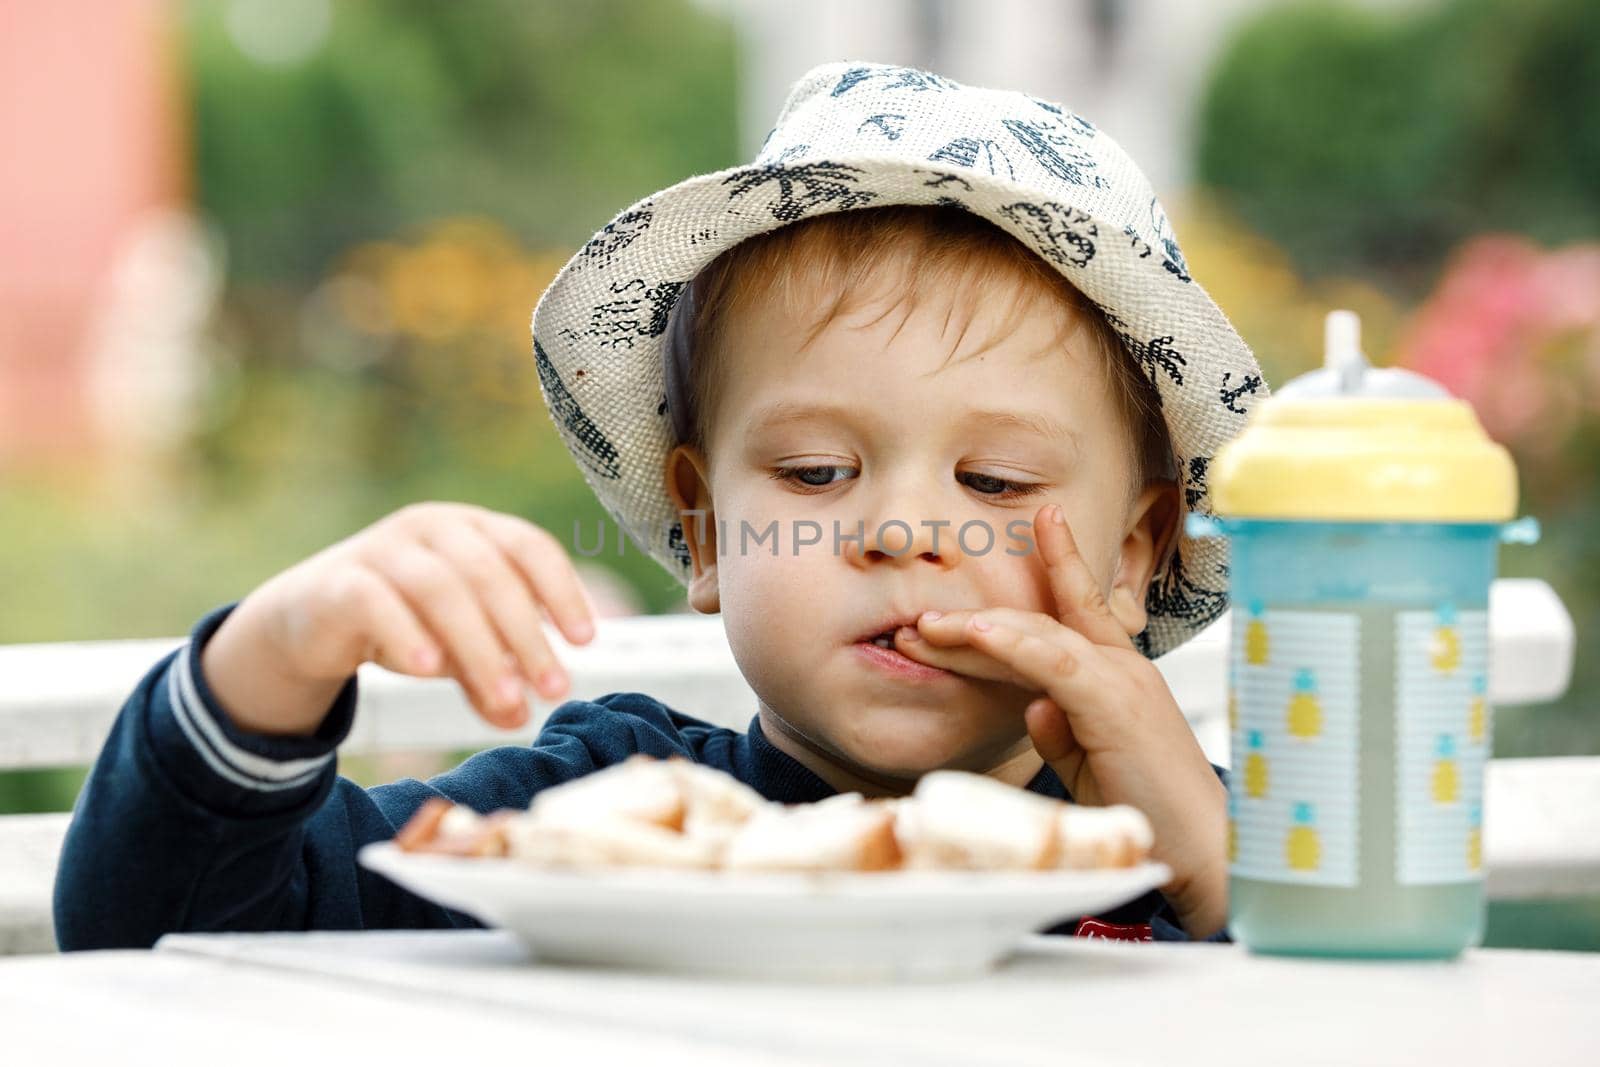 The boy eats toast for breakfast with juice in the background of a summer garden by Lincikas